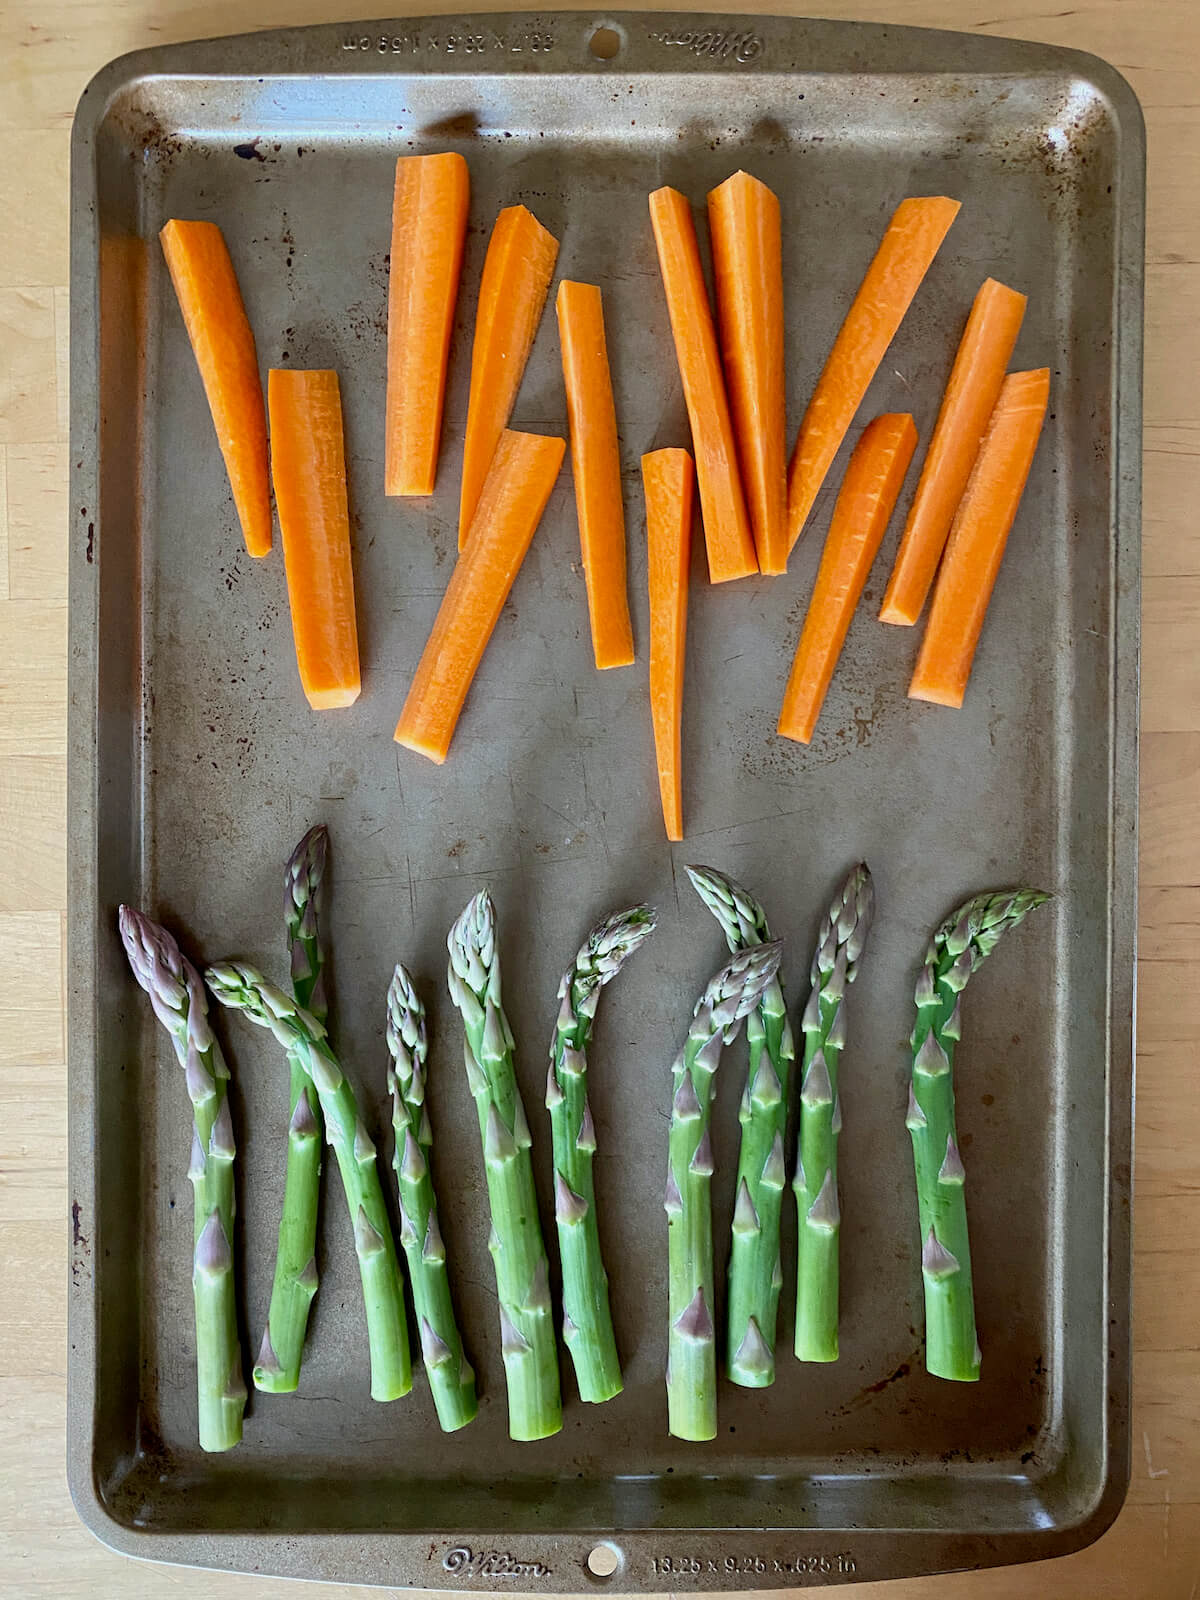 A rimmed baking sheet with trimmed asparagus and carrot sticks on it.